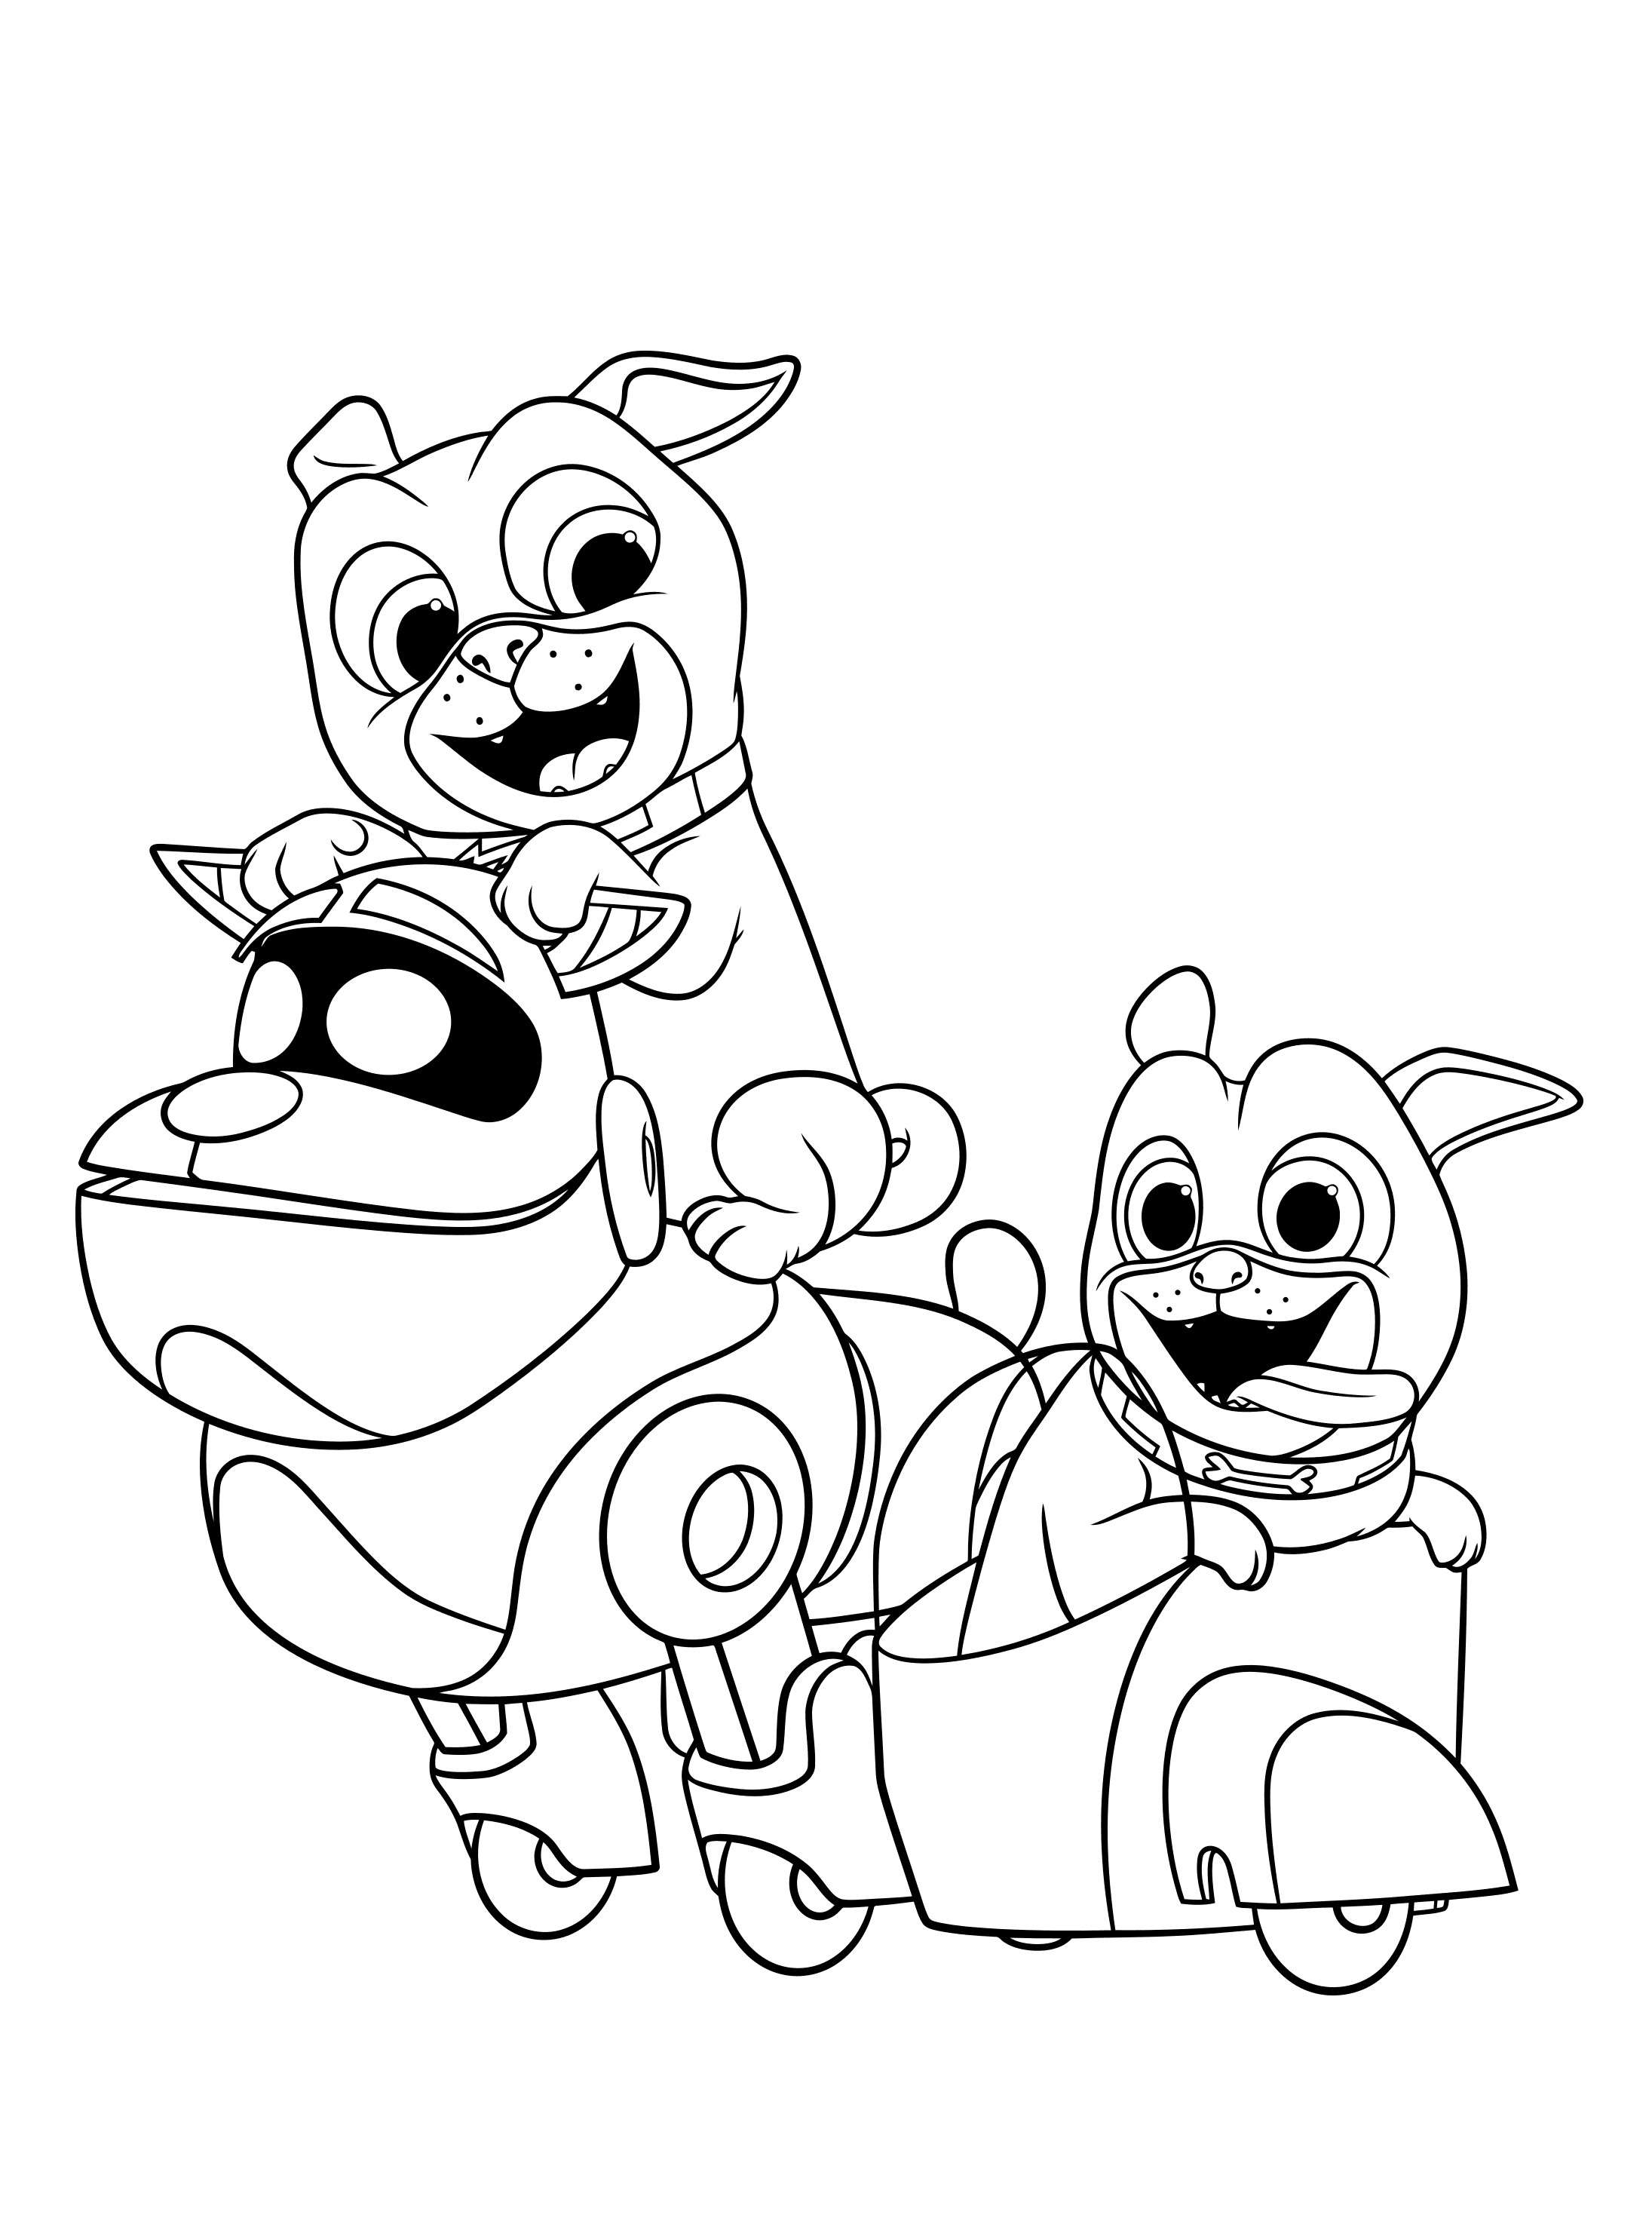 Puppy Pals Coloring Pages at GetDrawings | Free download